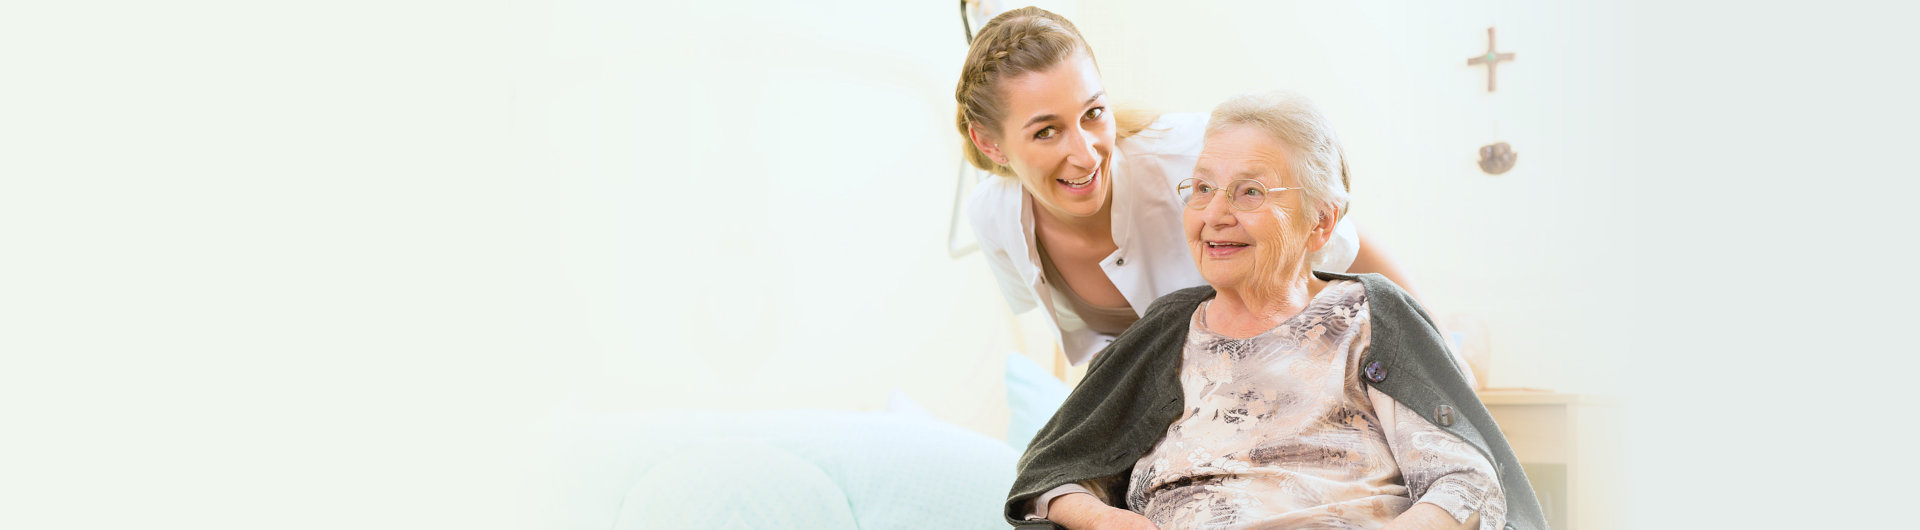 happy elderly woman with her caregiver